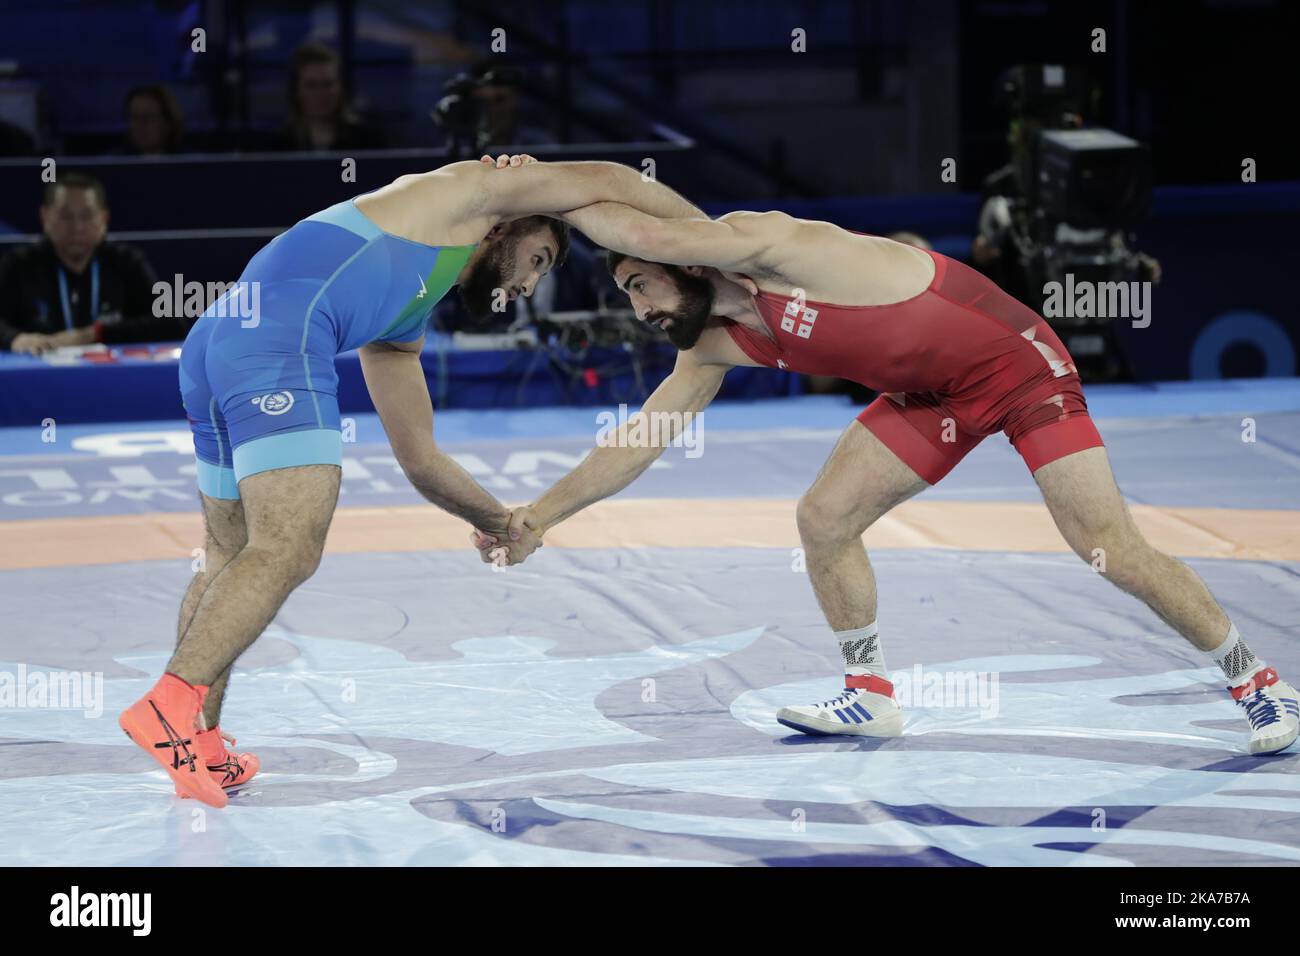 Oslo 20211005. Azerbaijani Turan Bayramov (left) and Georgian Zurab Iakobishvili during the final 3-5 in 70kg during Tuesday's matches during this year's wrestling WC in Oslo. Photo: Berit Roald / NTB  Stock Photo